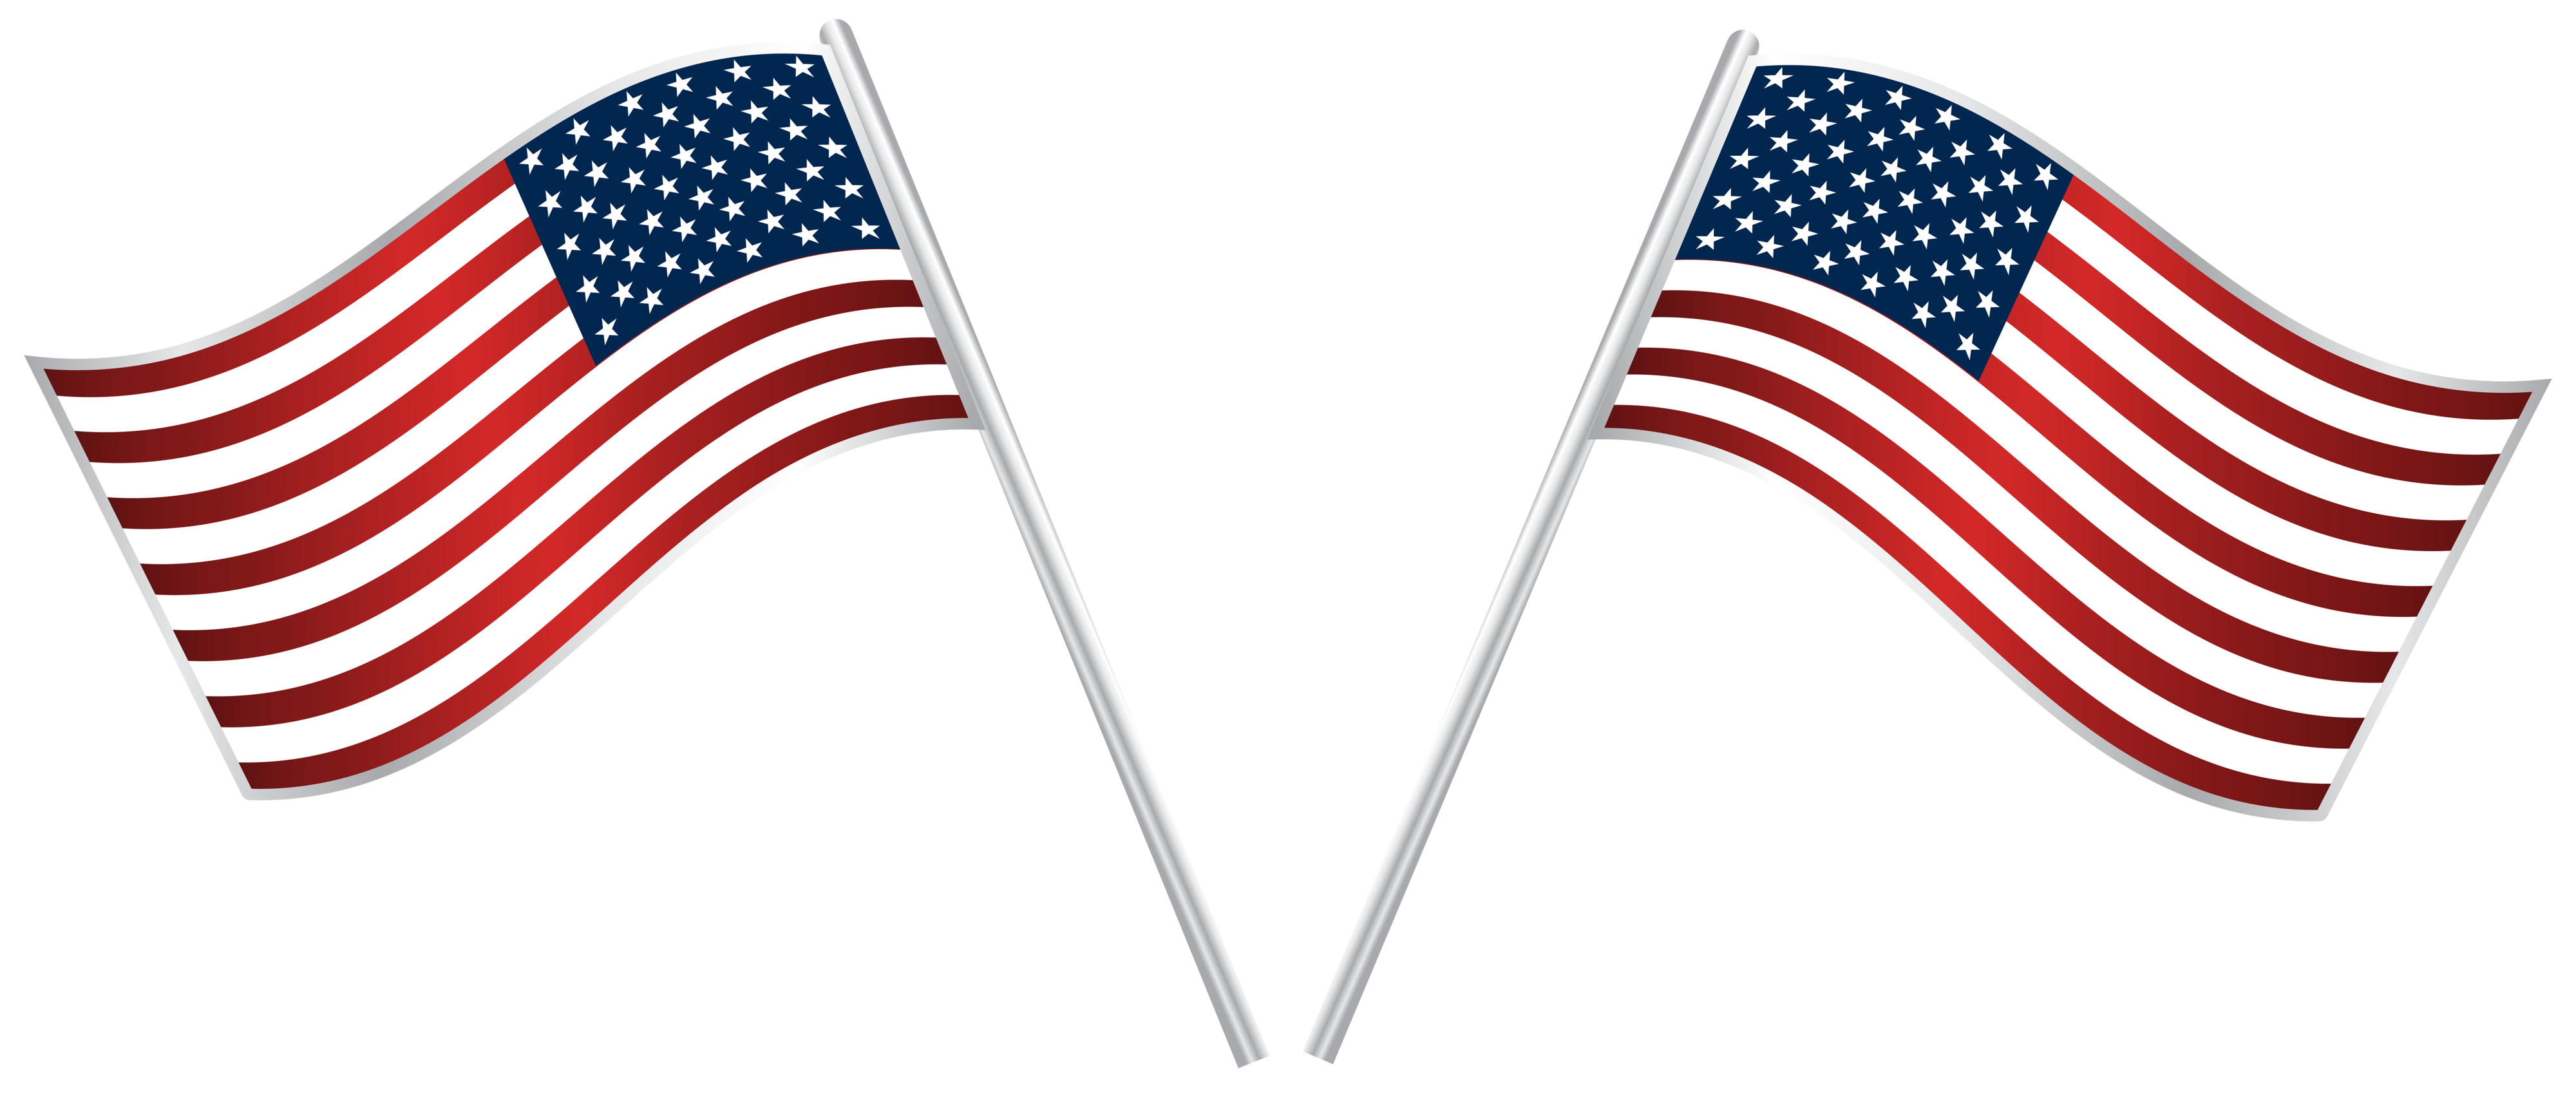 Download USA Flags PNG Clip Art Image